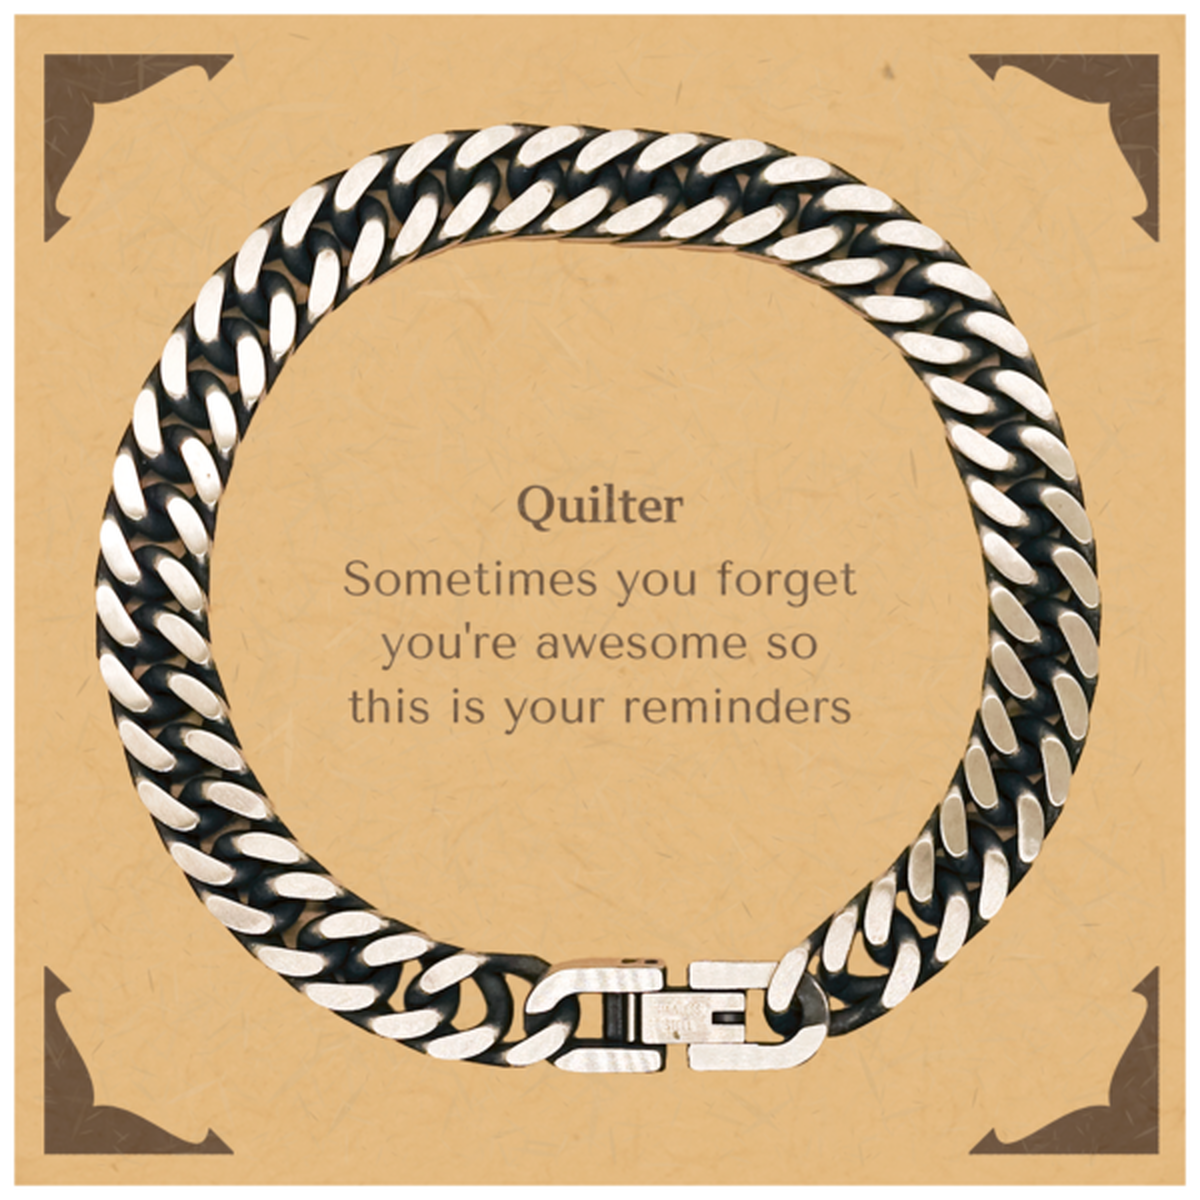 Sentimental Quilter Cuban Link Chain Bracelet, Quilter Sometimes you forget you're awesome so this is your reminders, Graduation Christmas Birthday Gifts for Quilter, Men, Women, Coworkers